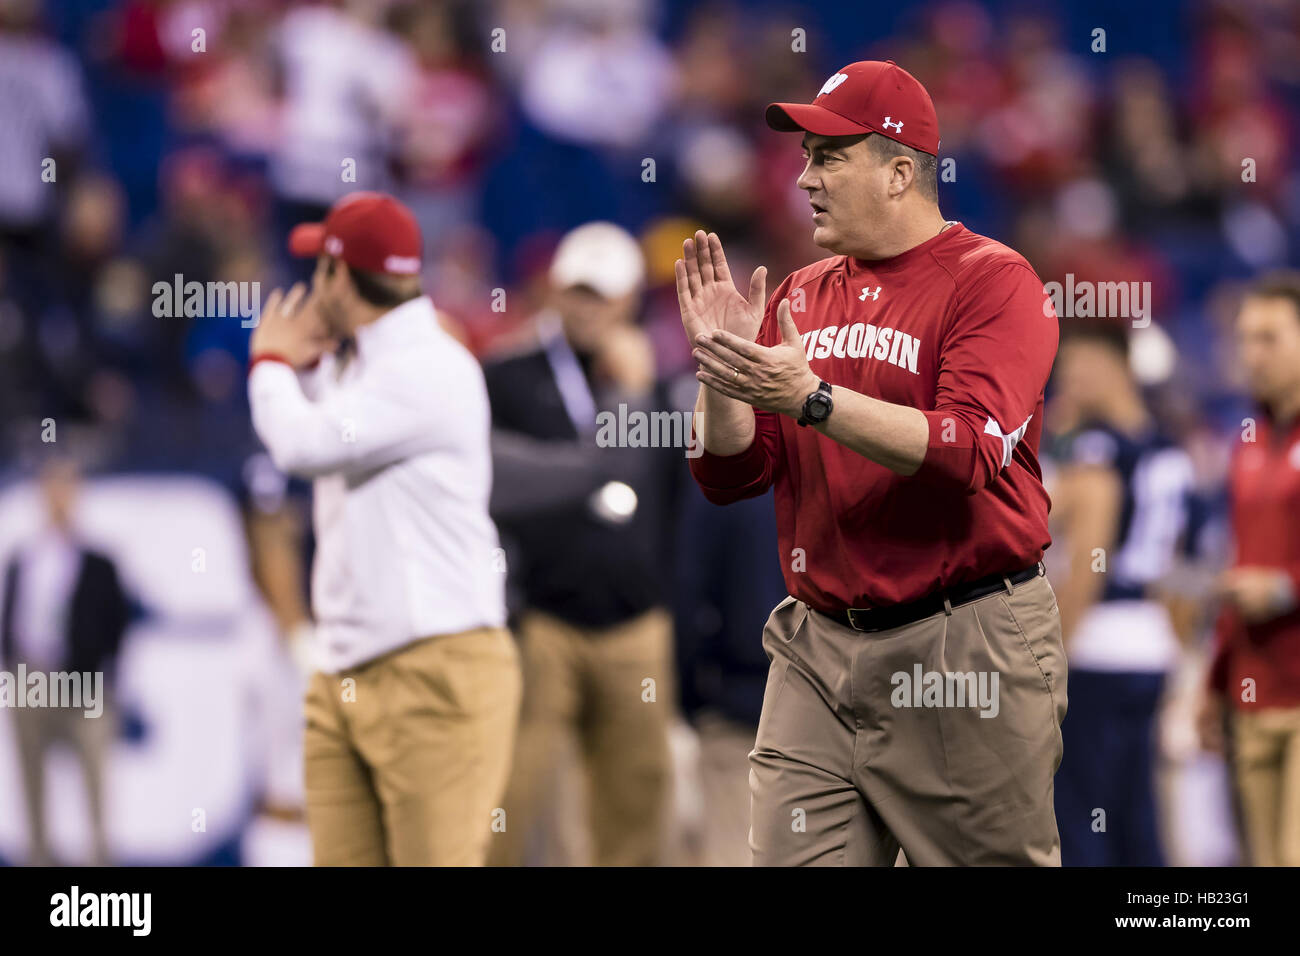 December 3, 2016 - Indianapolis, Indiana, U.S - December 3, 2016 - Indianapolis, Indiana - Wisconsin Badgers head coach Paul Chryst before the Big Ten Championship game between Penn State Nittany Lions and Wisconsin Badgers at Lucas Oil Stadium. (Credit Image: © Scott Taetsch via ZUMA Wire) Stock Photo